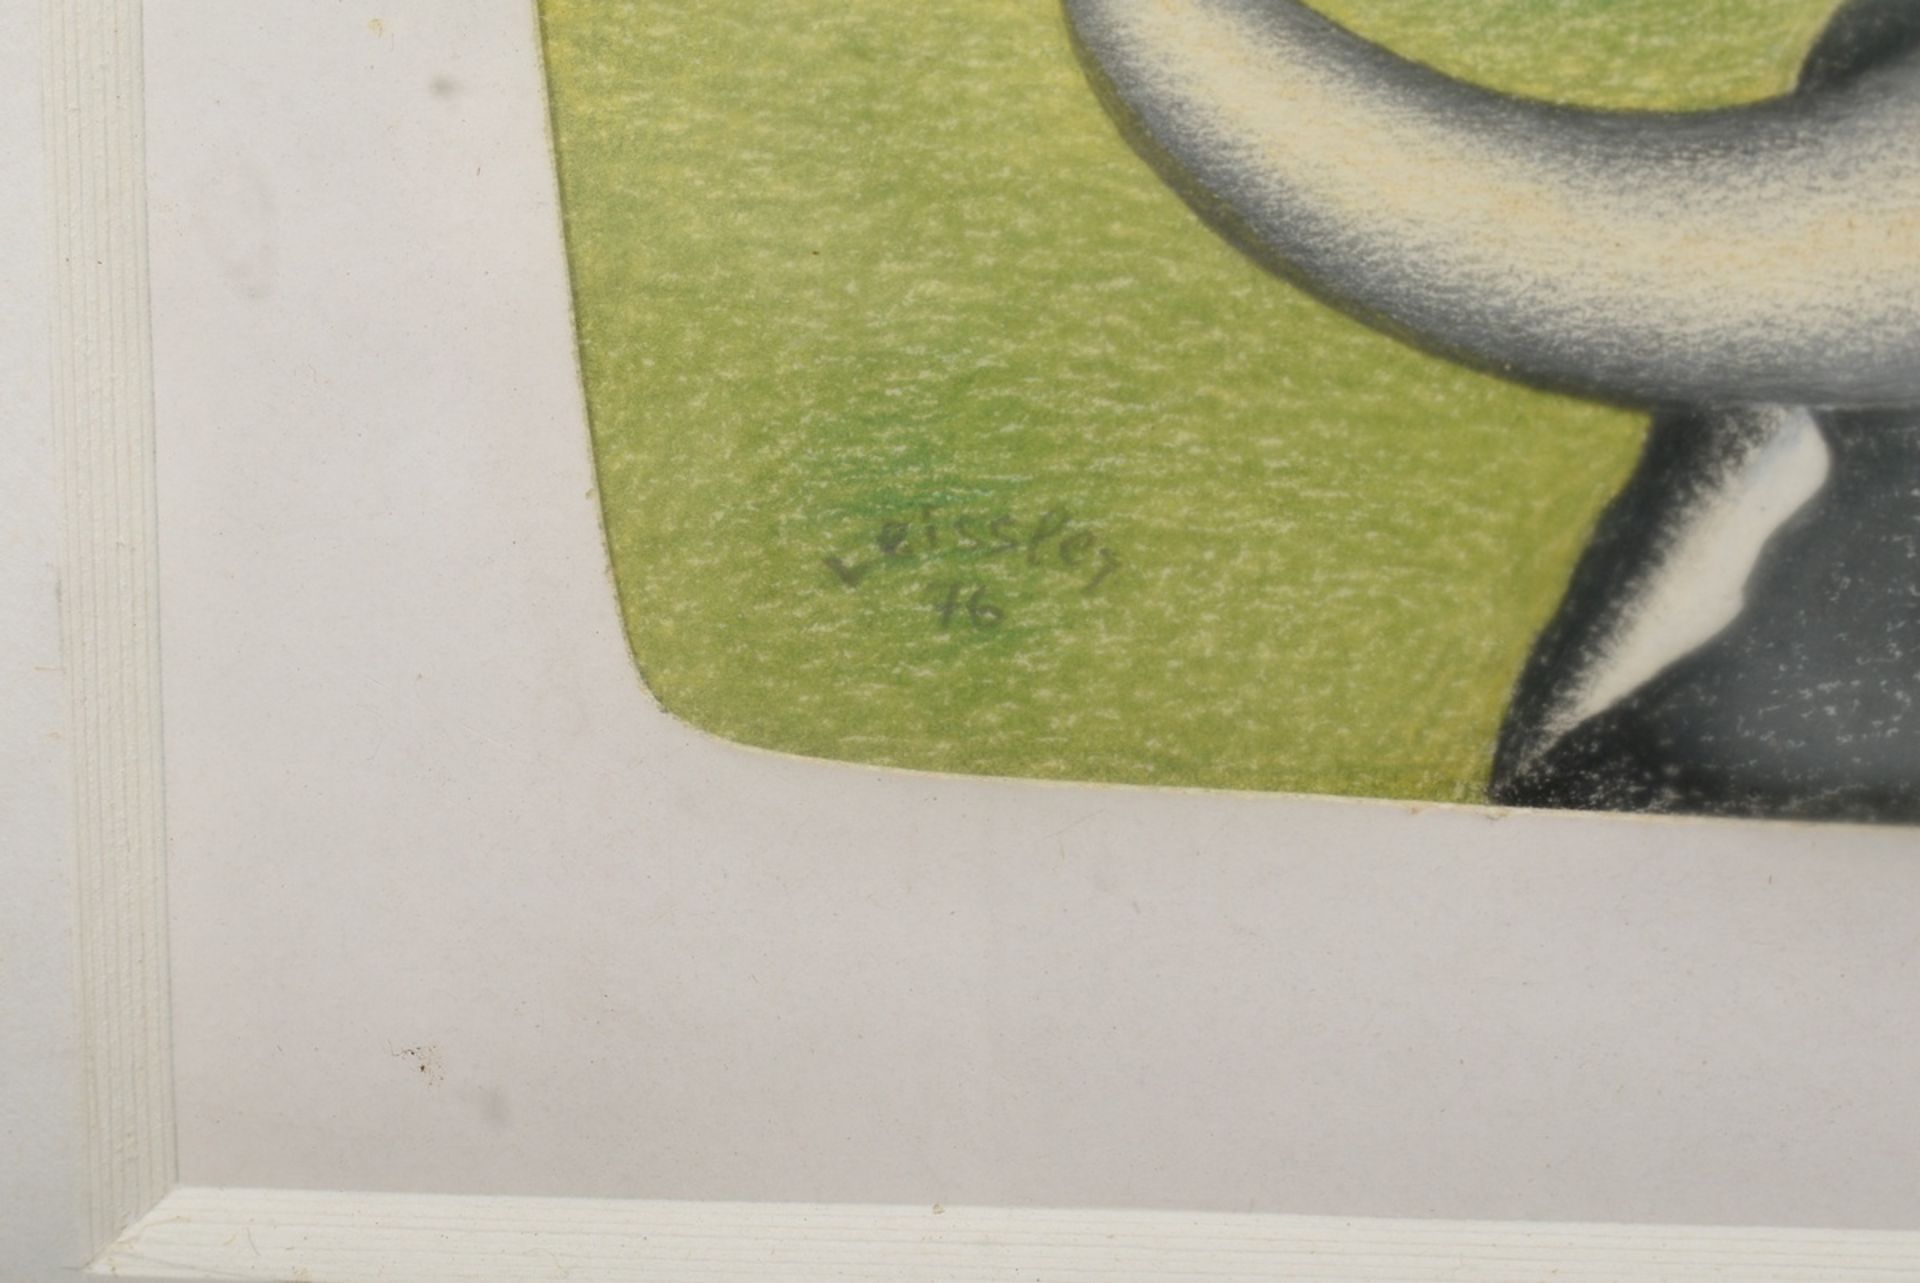 Leissler, Arnold (1939-2014) "Lower Saxony cow NDR" 1976, coloured pencil, sign./dat. lower left, s - Image 3 of 3